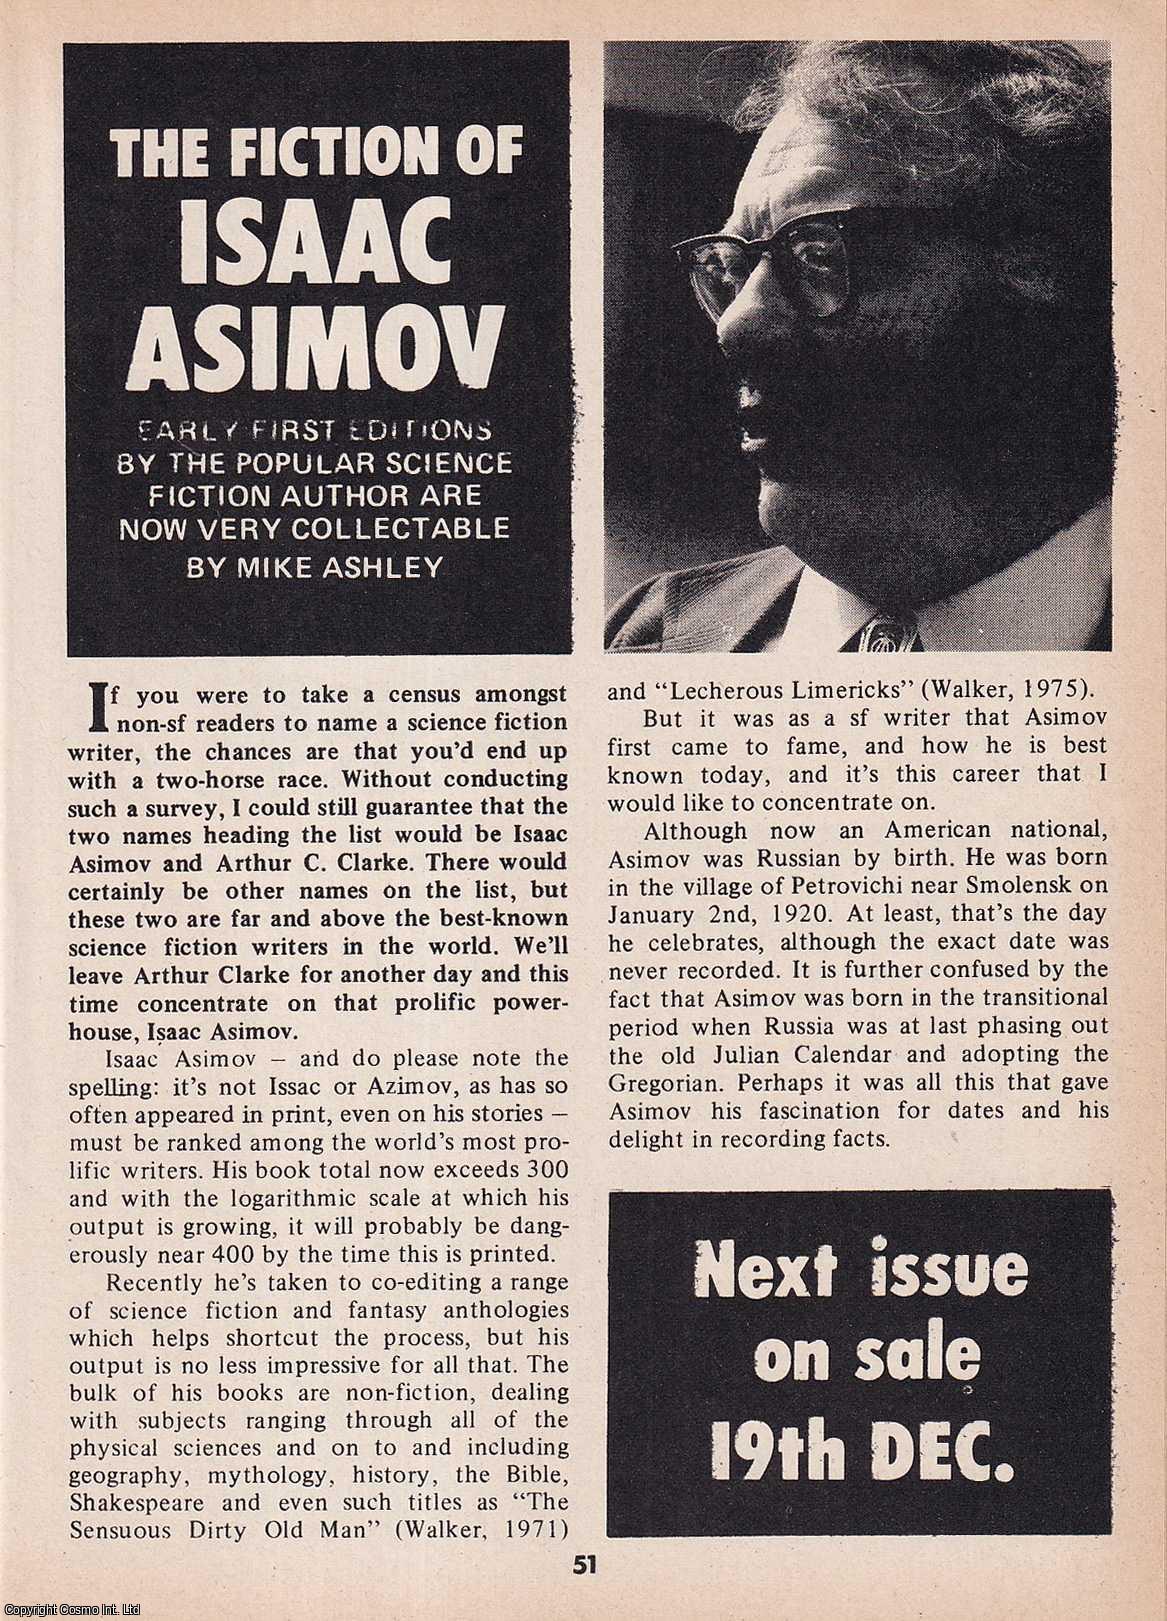 Mike Ashley - The Fiction of Isaac Asimov. This is an original article separated from an issue of The Book & Magazine Collector publication.